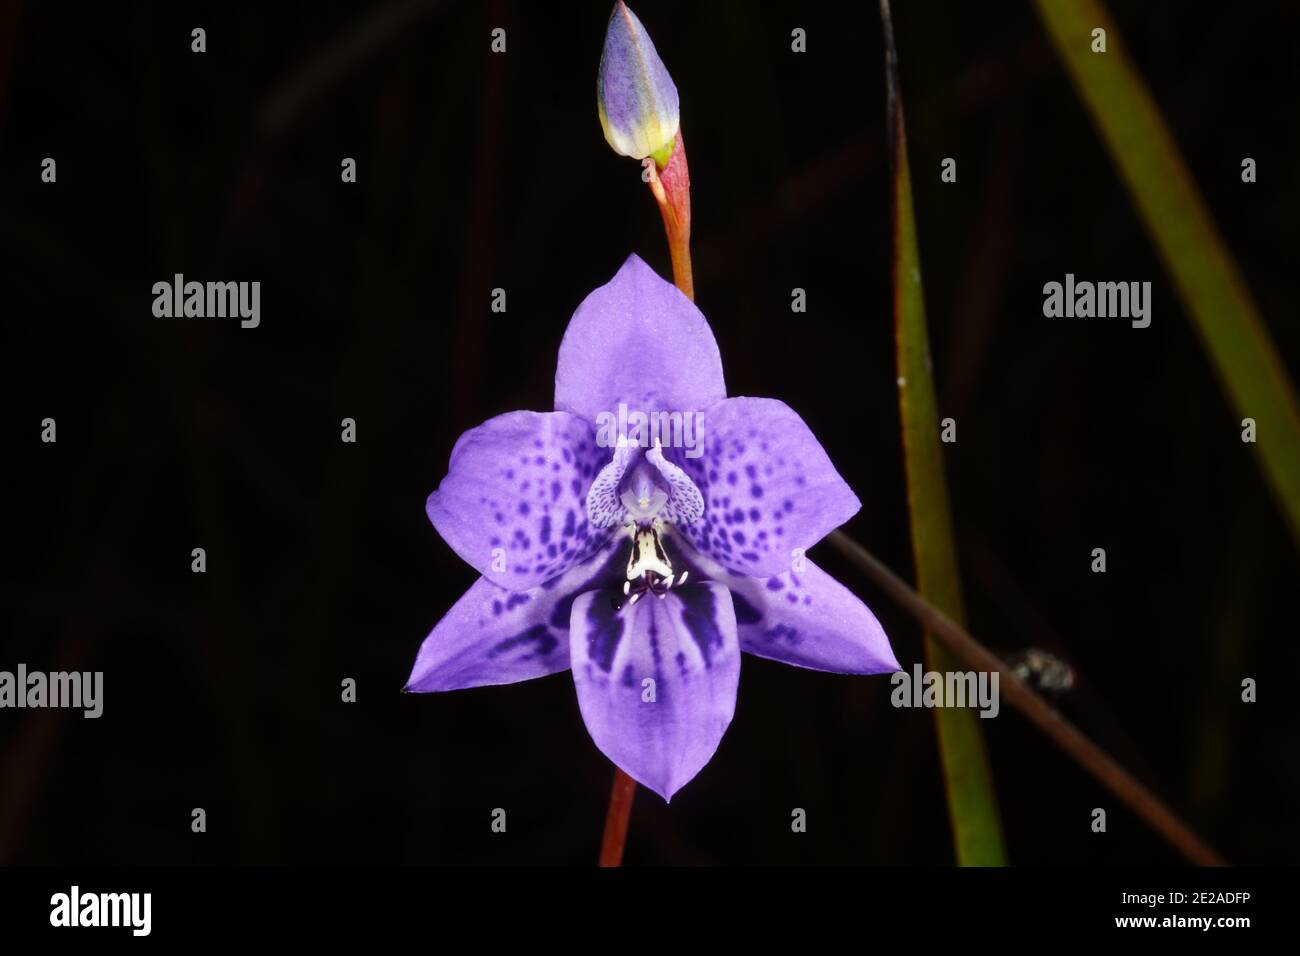 Blue orchid flower of Epiblema grandiflorum, babe-in-a-cradle, habitat on the south coast of Western Australia, frontal view with dark background Stock Photo